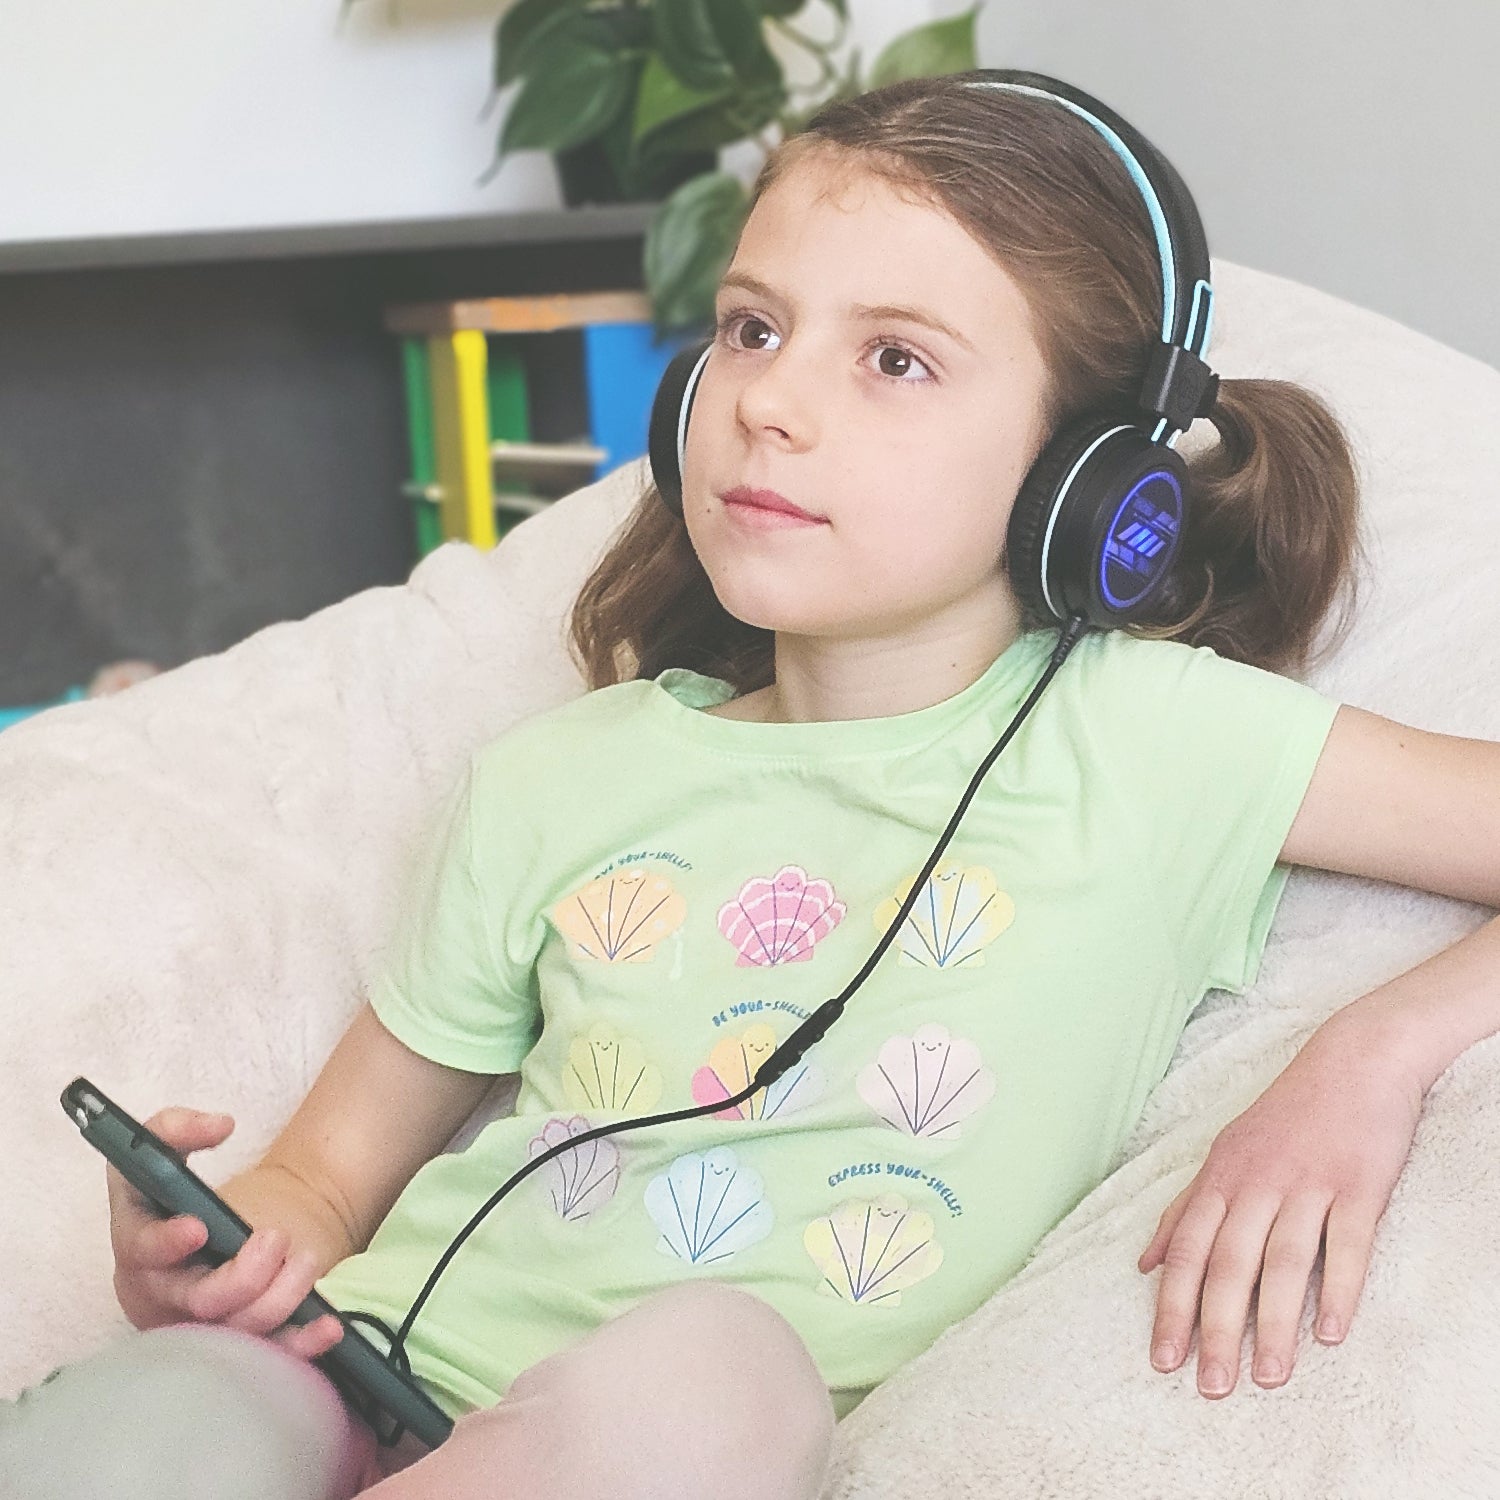 A young girl lounging on a couch while wearing large headphones connected to a smartphone, looking thoughtful. there's a potted plant in the background.